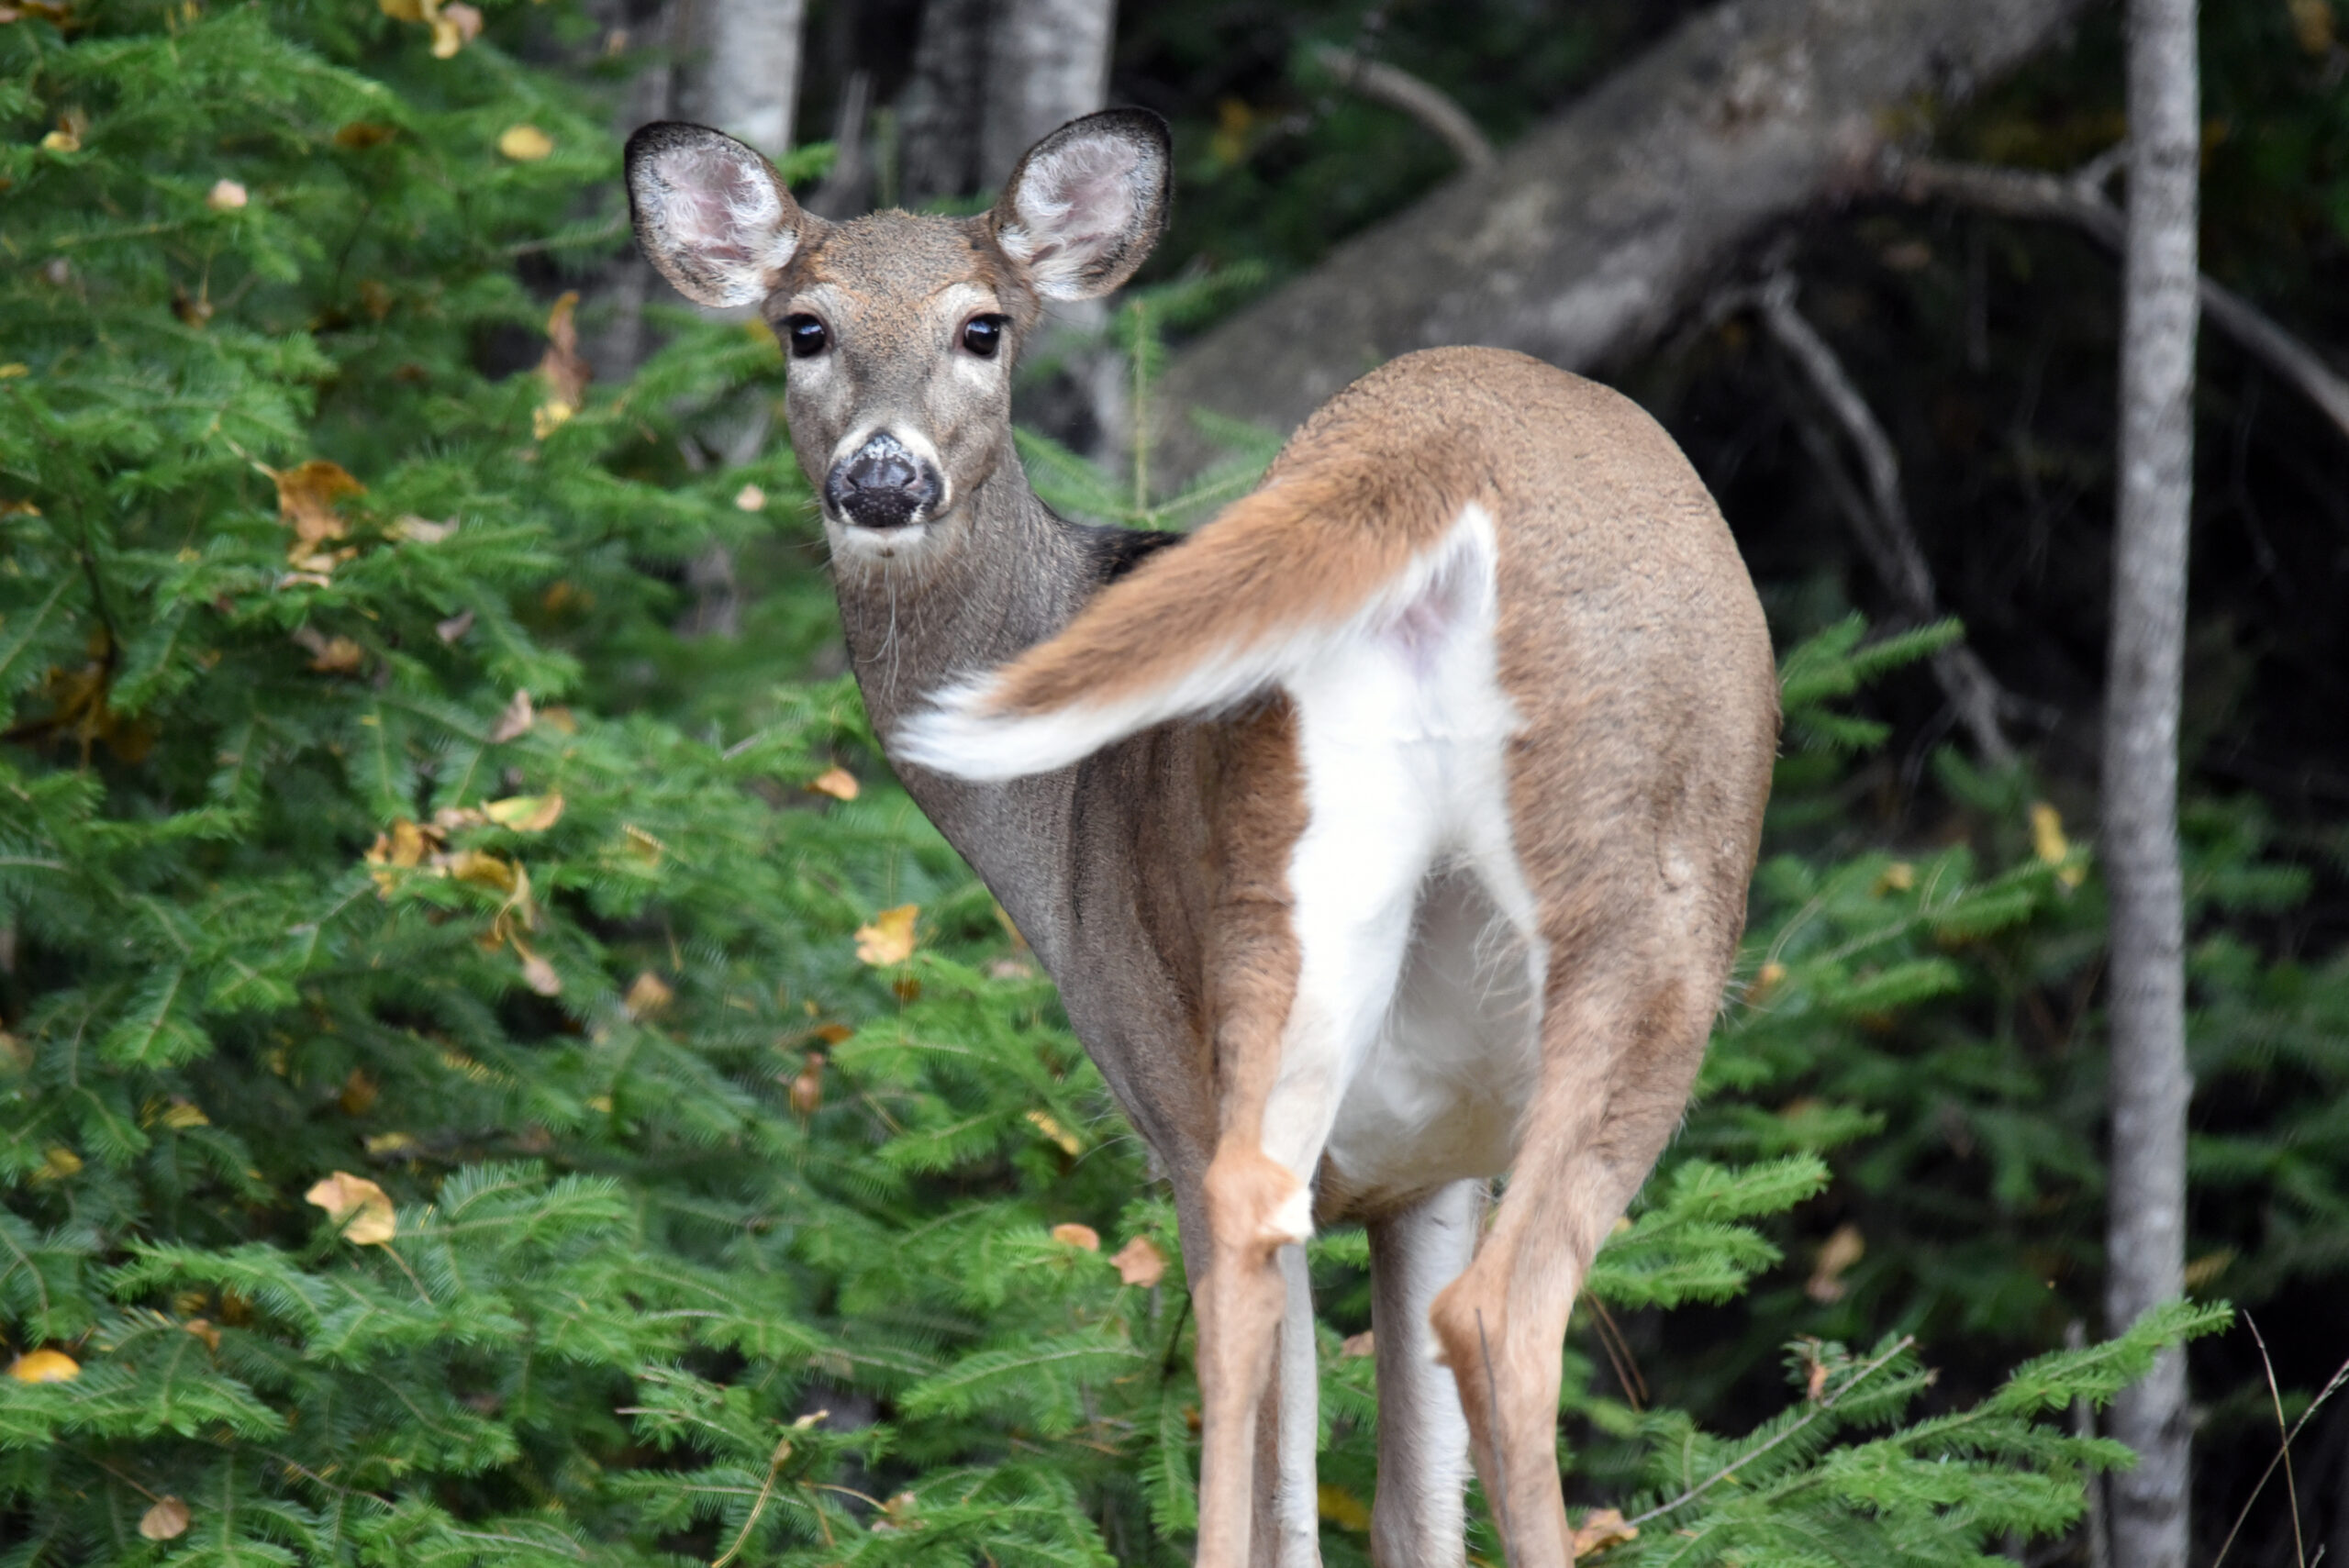 A man admitted to poaching deer because they ate his trees.